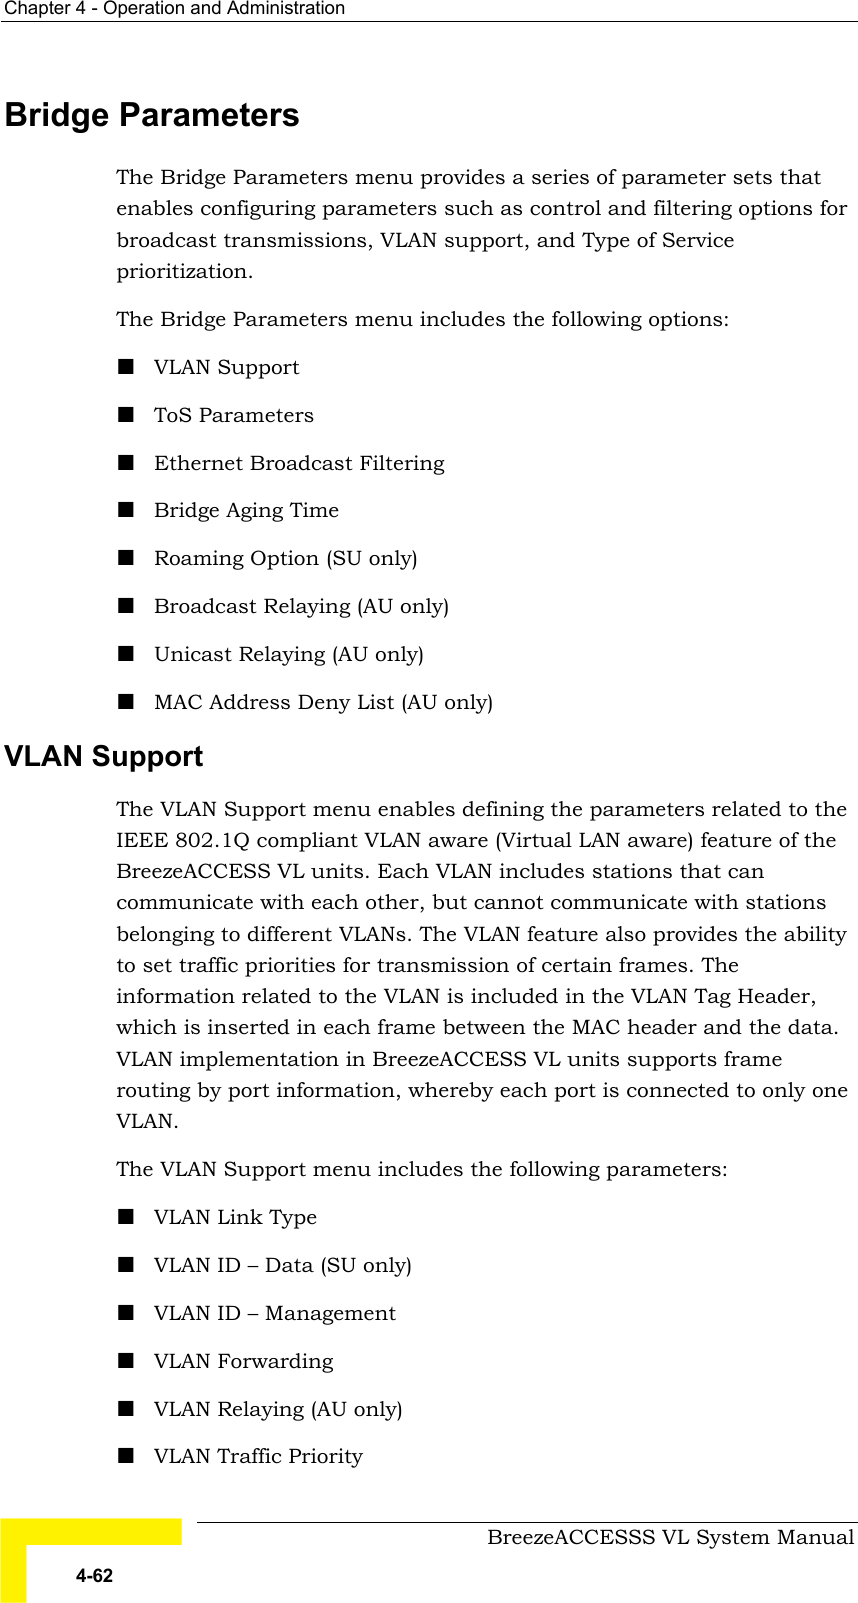 Chapter  4 - Operation and Administration     BreezeACCESSS VL System Manual 4-62 Bridge Parameters The Bridge Parameters menu provides a series of parameter sets that enables configuring parameters such as control and filtering options for broadcast transmissions, VLAN support, and Type of Service prioritization. The Bridge Parameters menu includes the following options: ! VLAN Support ! ToS Parameters ! Ethernet Broadcast Filtering ! Bridge Aging Time ! Roaming Option (SU only) ! Broadcast Relaying (AU only) ! Unicast Relaying (AU only) ! MAC Address Deny List (AU only) VLAN Support The VLAN Support menu enables defining the parameters related to the IEEE 802.1Q compliant VLAN aware (Virtual LAN aware) feature of the BreezeACCESS VL units. Each VLAN includes stations that can communicate with each other, but cannot communicate with stations belonging to different VLANs. The VLAN feature also provides the ability to set traffic priorities for transmission of certain frames. The information related to the VLAN is included in the VLAN Tag Header, which is inserted in each frame between the MAC header and the data. VLAN implementation in BreezeACCESS VL units supports frame routing by port information, whereby each port is connected to only one VLAN. The VLAN Support menu includes the following parameters: ! VLAN Link Type ! VLAN ID – Data (SU only) ! VLAN ID – Management ! VLAN Forwarding ! VLAN Relaying (AU only) ! VLAN Traffic Priority 